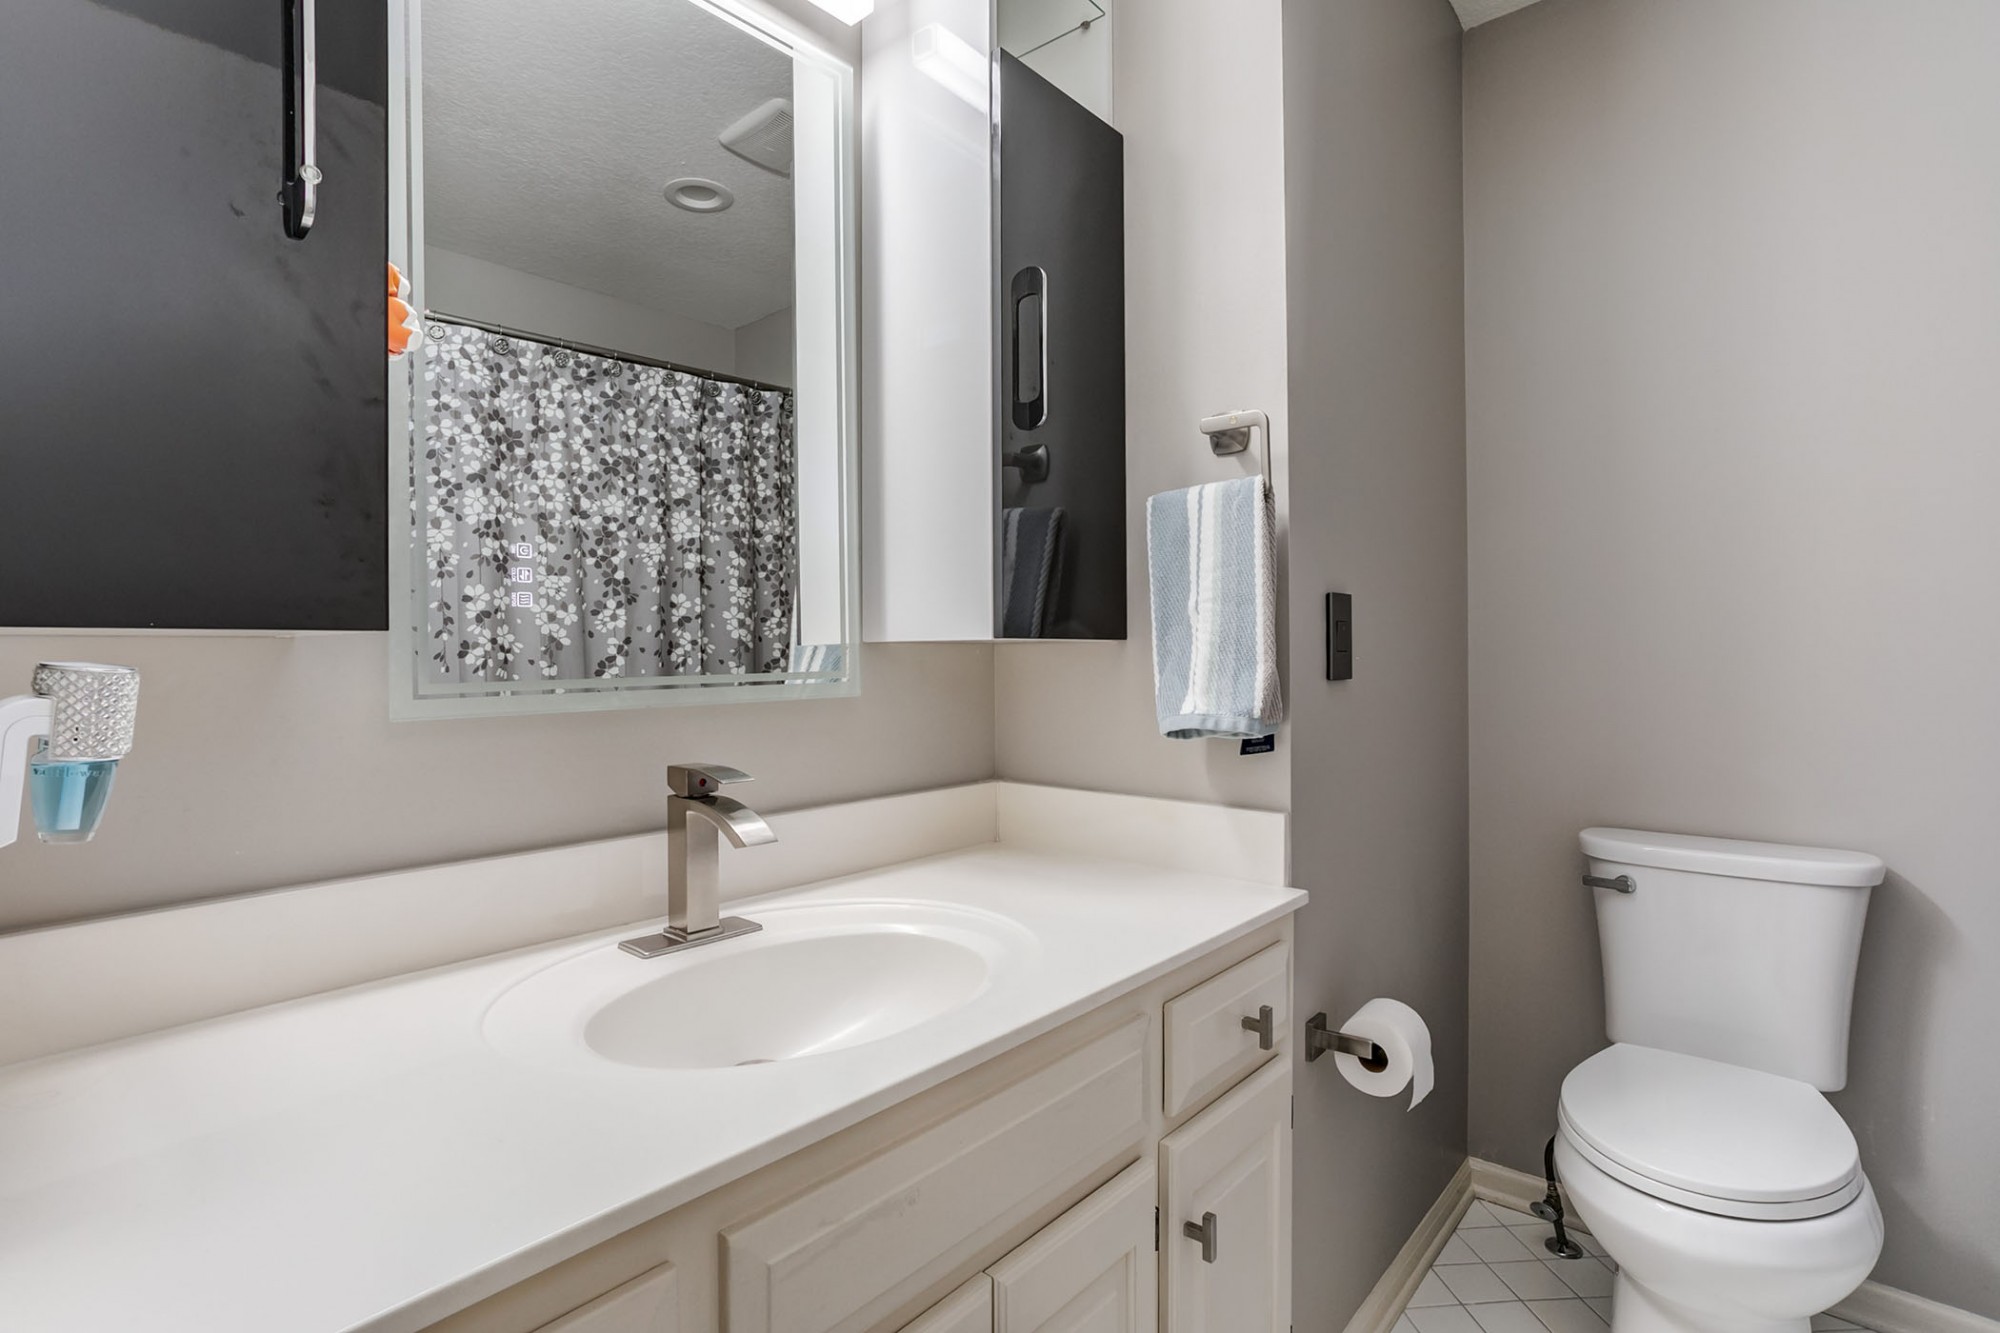 2nd bedroom's en-suite bath with ample storage, tile flooring and tub/shower combo.